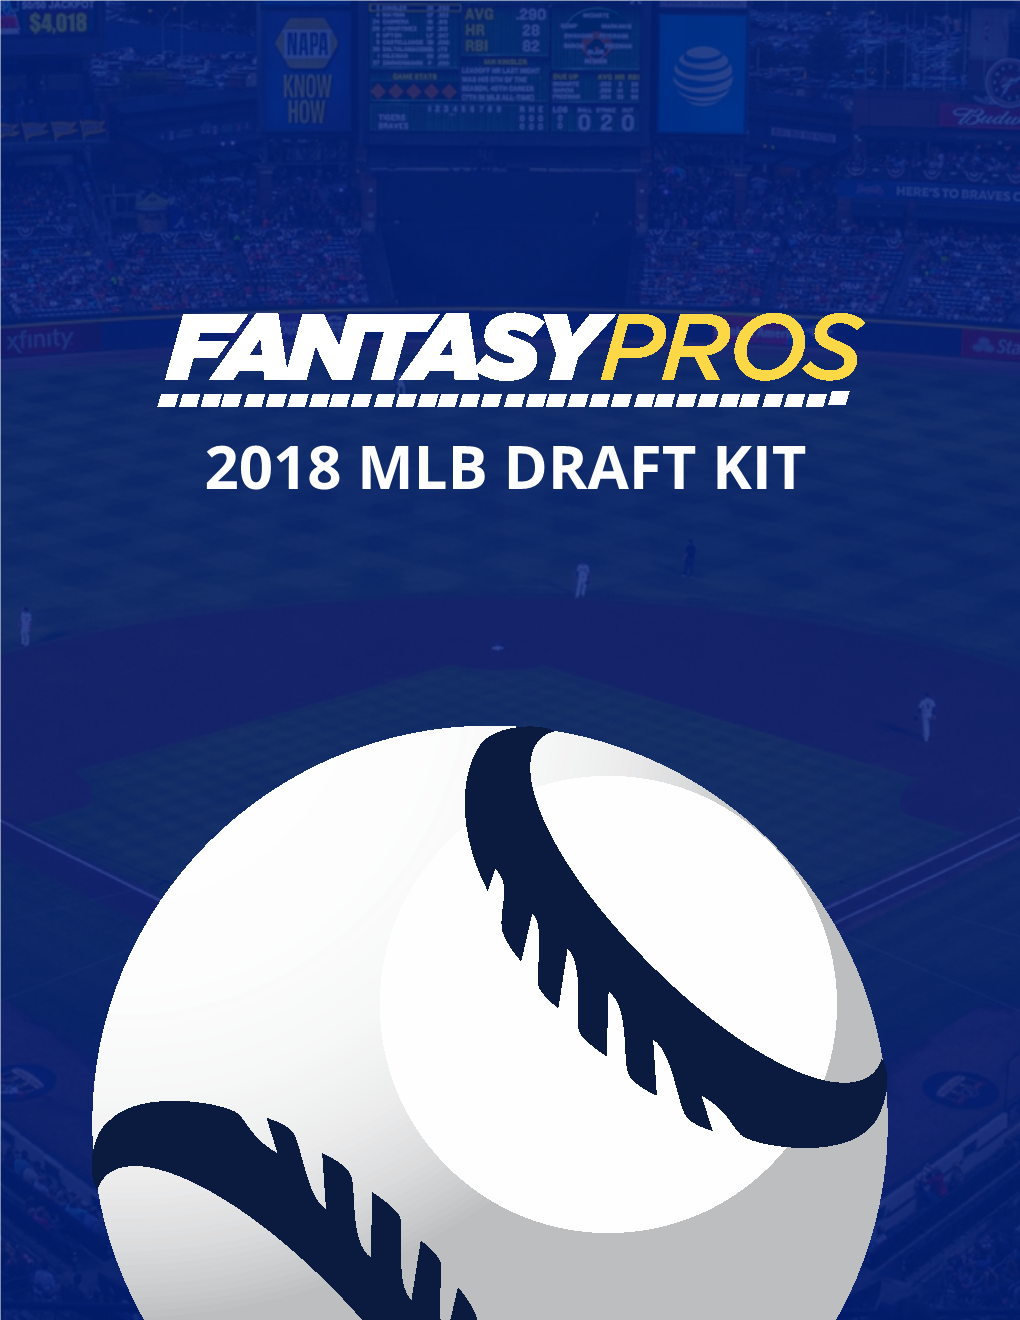 2018 MLB DRAFT KIT Table of Contents